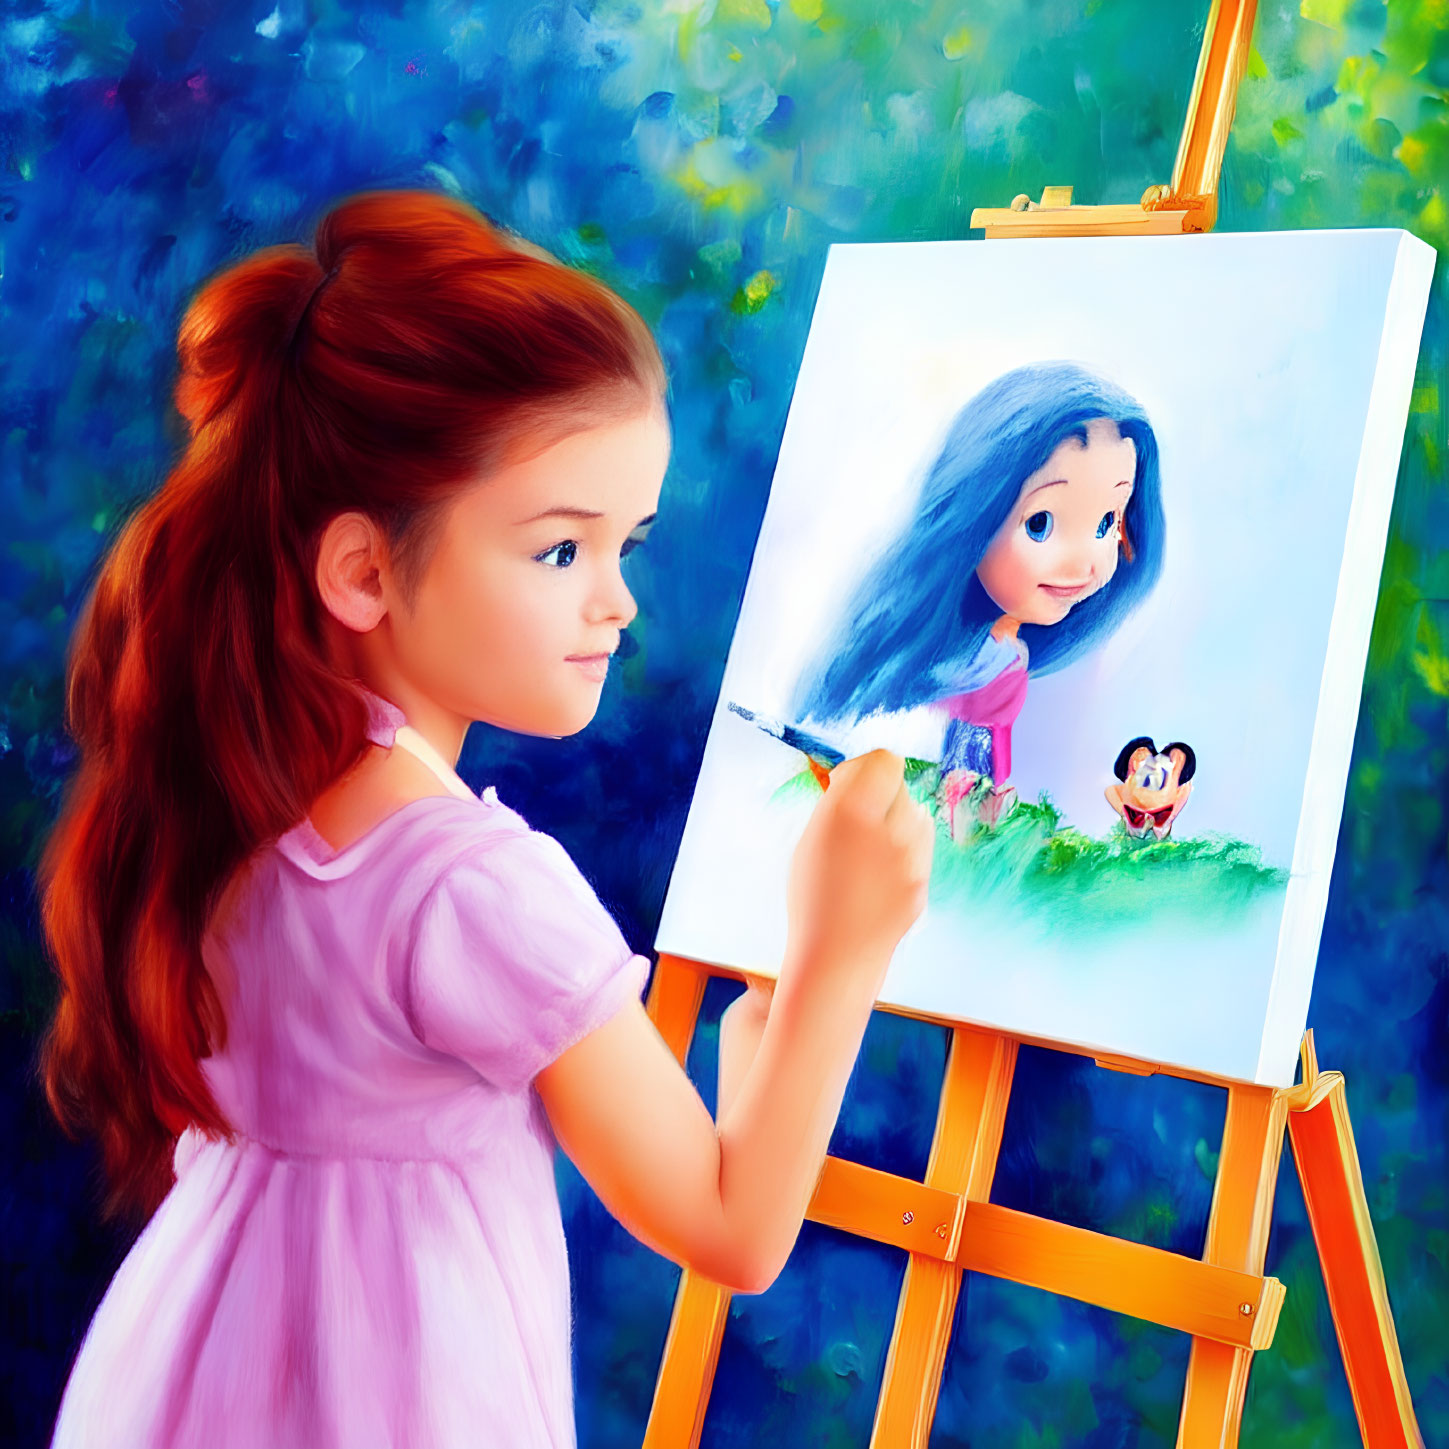 Red-haired girl in pink dress painting portrait of girl and creature on canvas